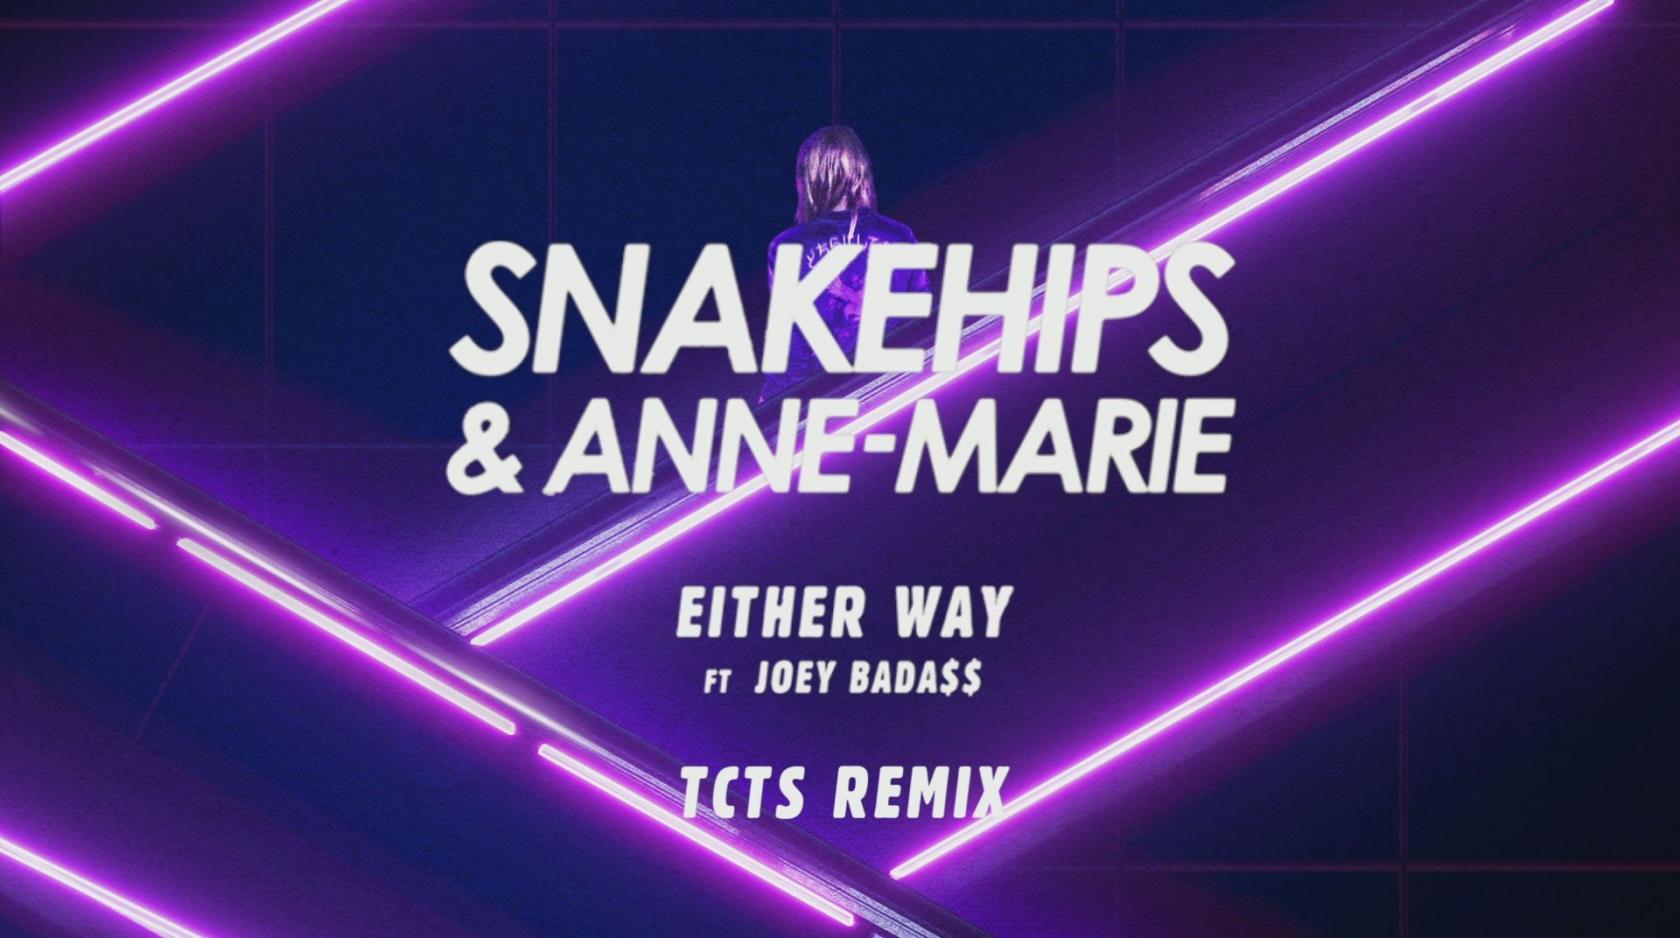 Way way ремикс песню. Snakehips. Either way. Snakehips - sometimes. ABC (the Wild Remix) by Gayle.